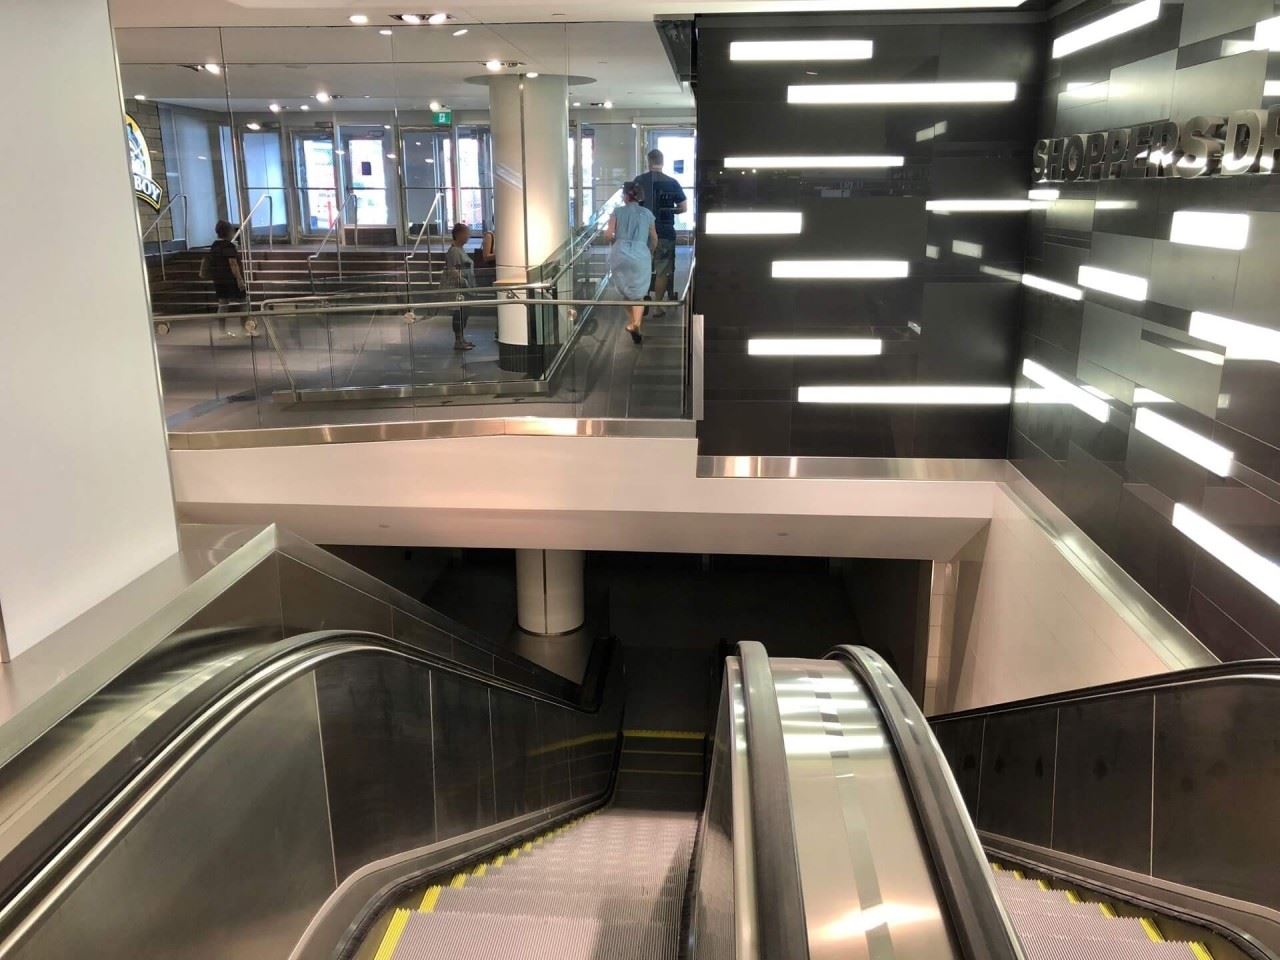 Interior entrance from Rideau Centre to Rideau Station. It is located between Shoppers Drug Mart and Farm Boy on the 1st floor.